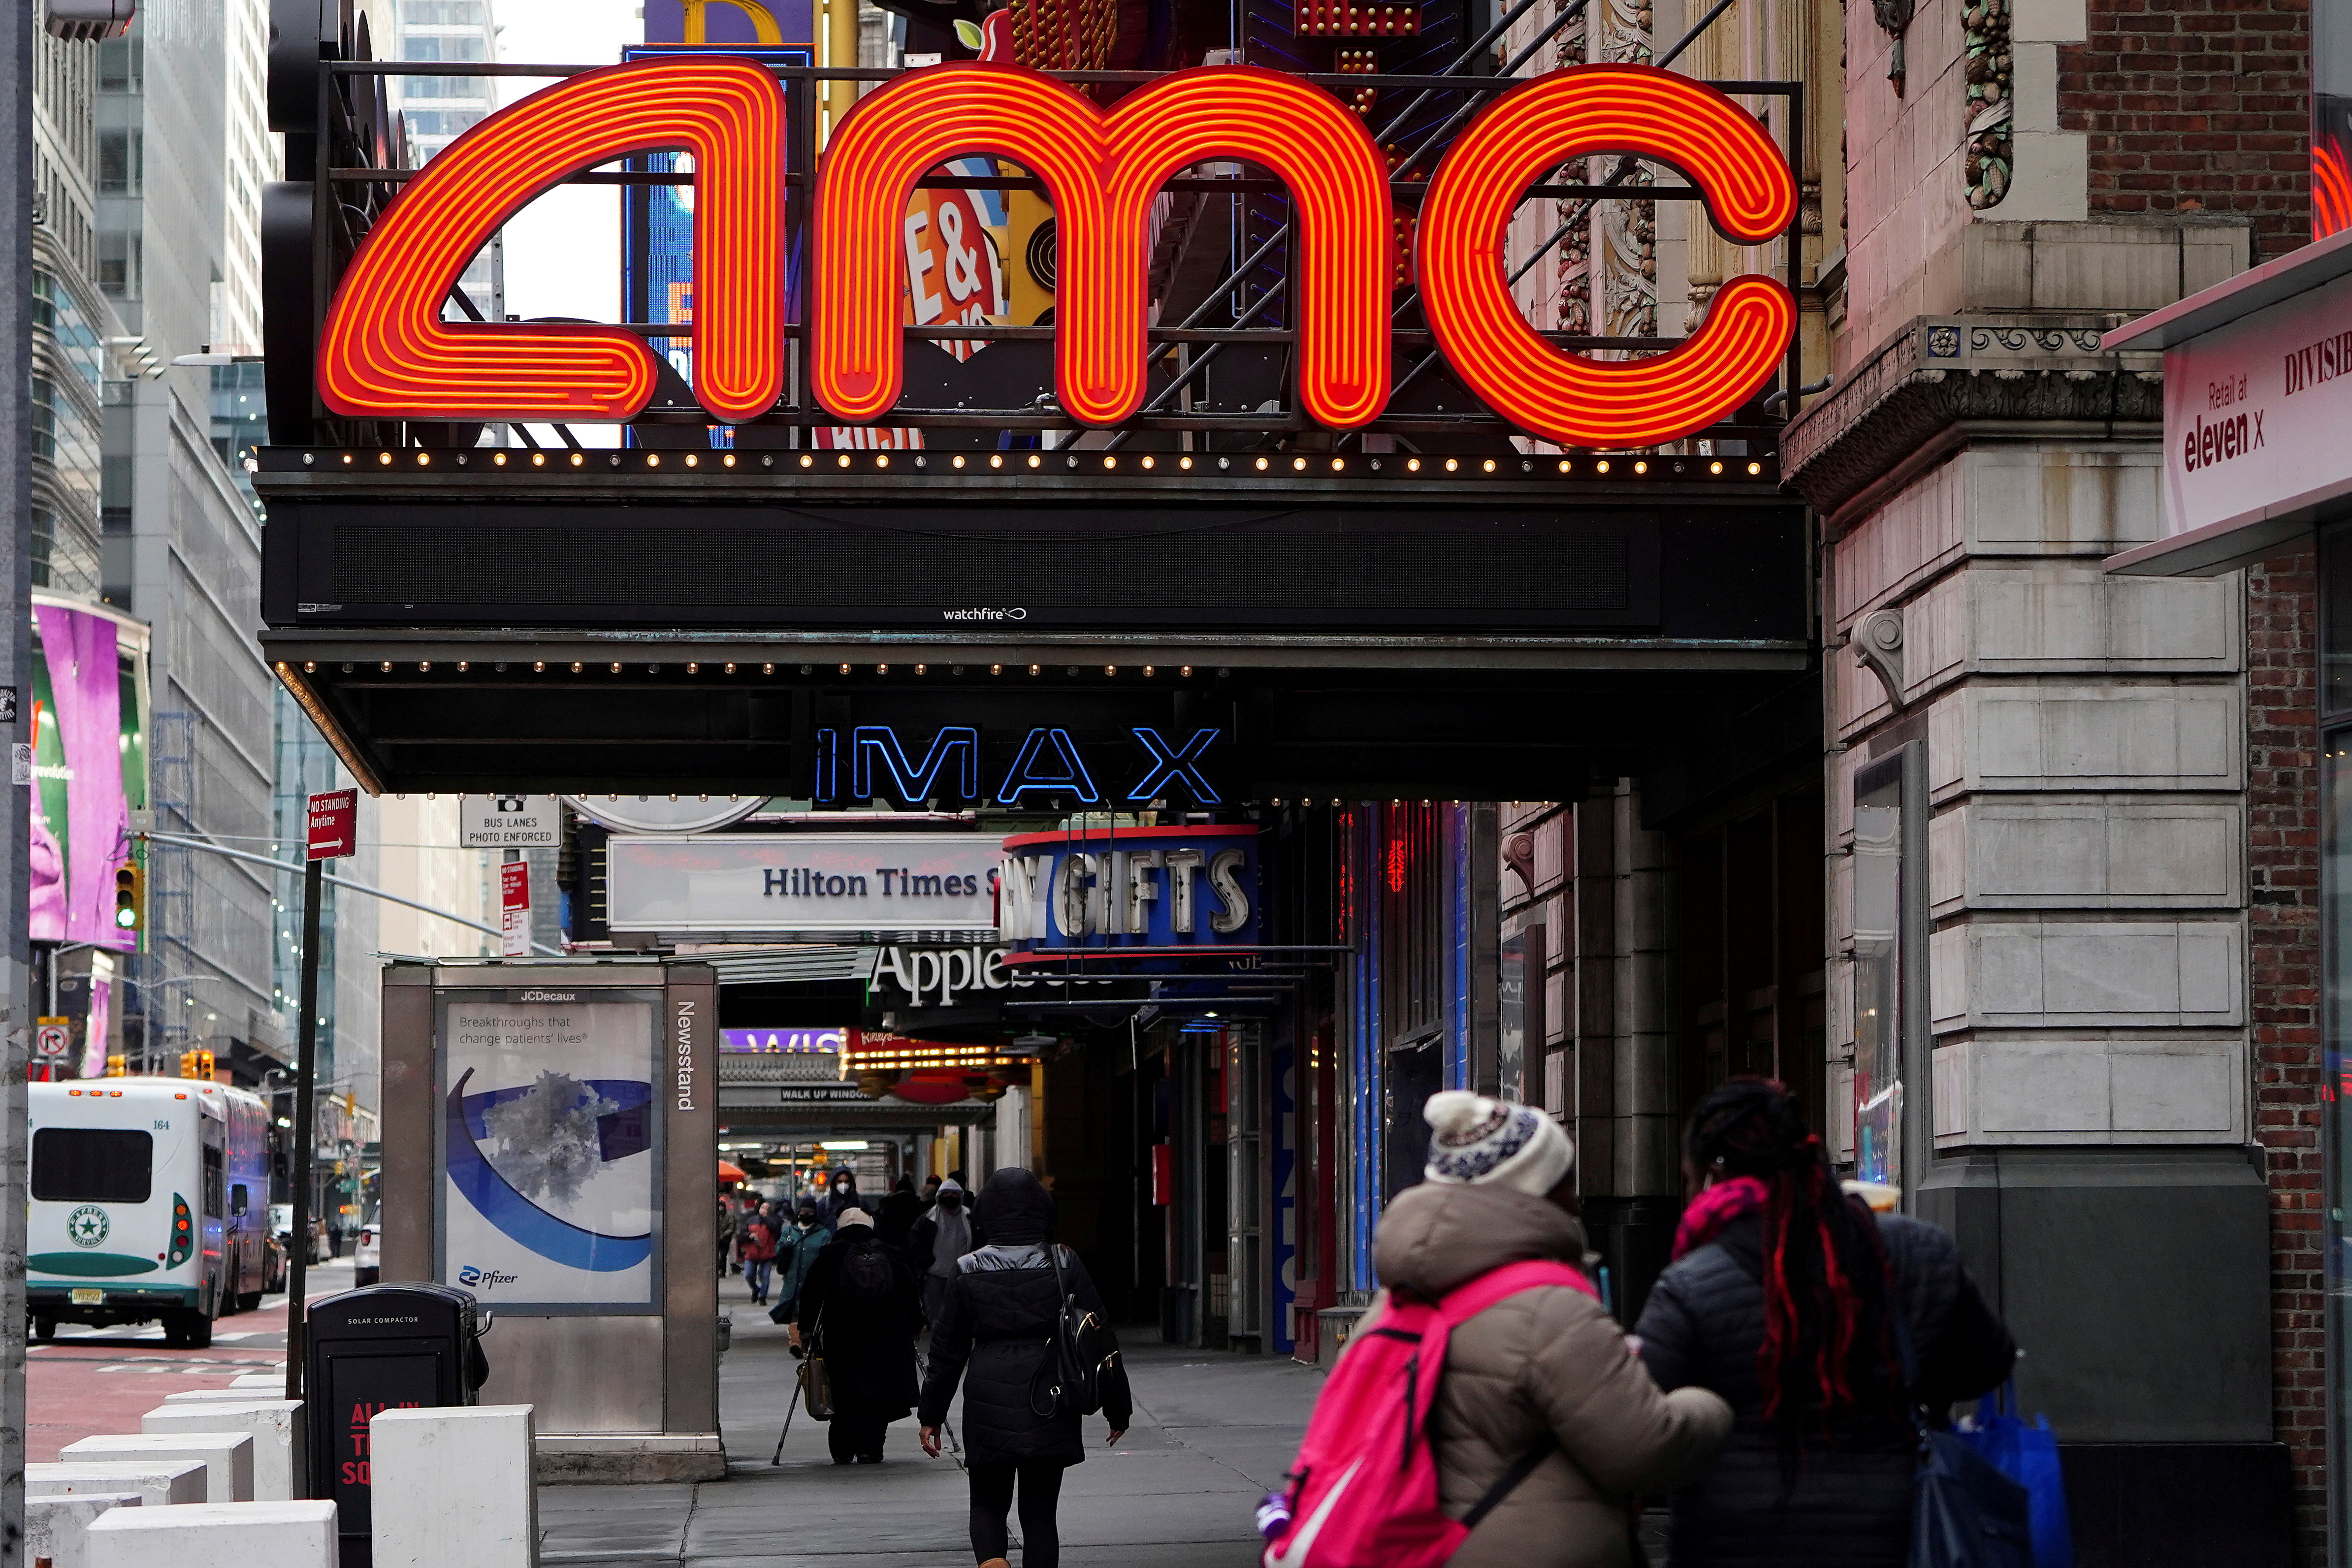 An AMC theatre is pictured in New York